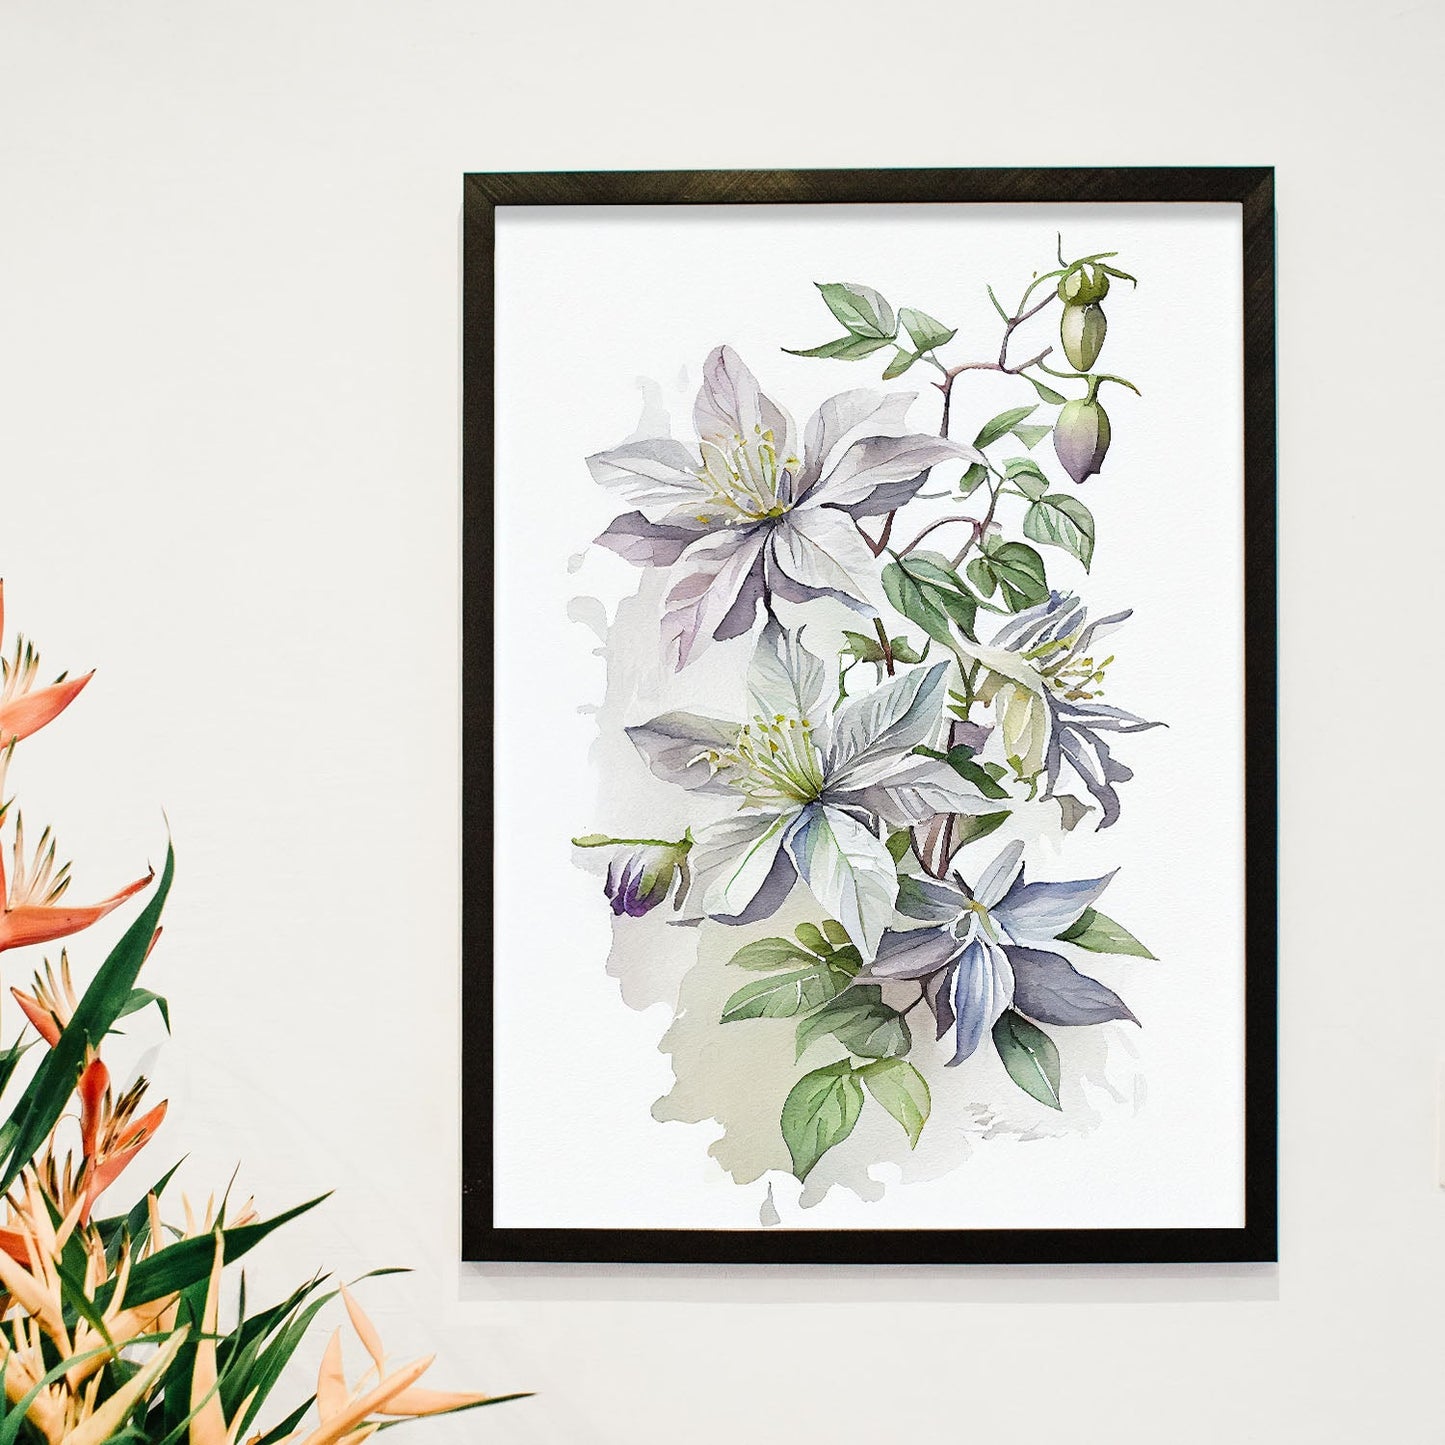 Nacnic watercolor minmal Clematis_1. Aesthetic Wall Art Prints for Bedroom or Living Room Design.-Artwork-Nacnic-A4-Sin Marco-Nacnic Estudio SL